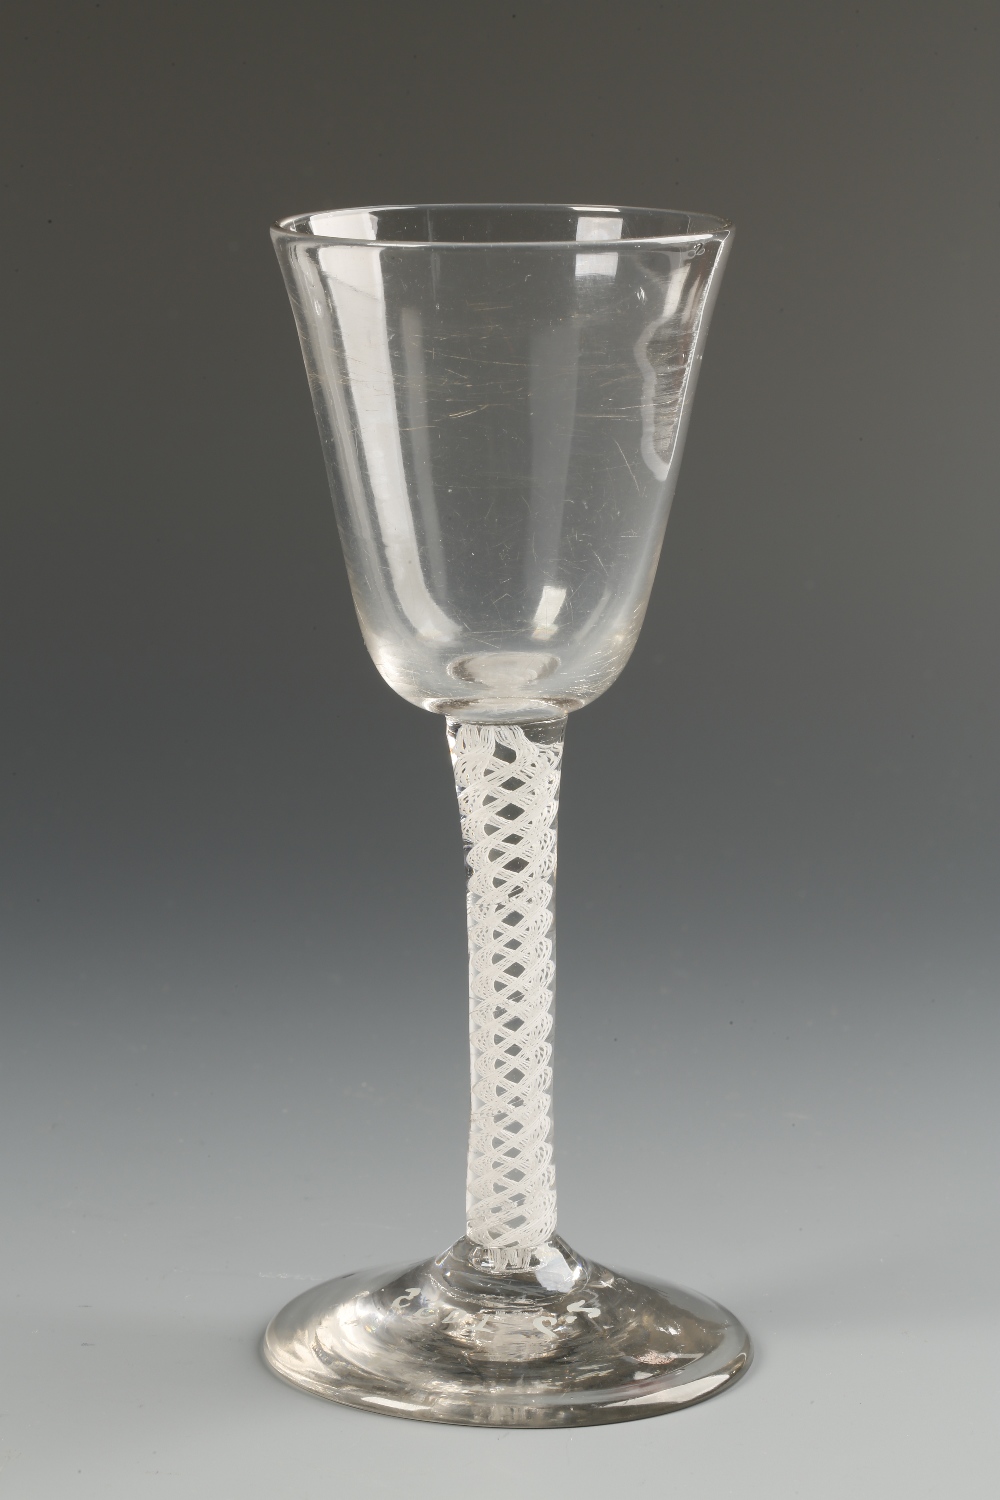 AN 18TH CENTURY WINE GLASS with a plain straight-sided bowl on a double air-twist stem on a circular